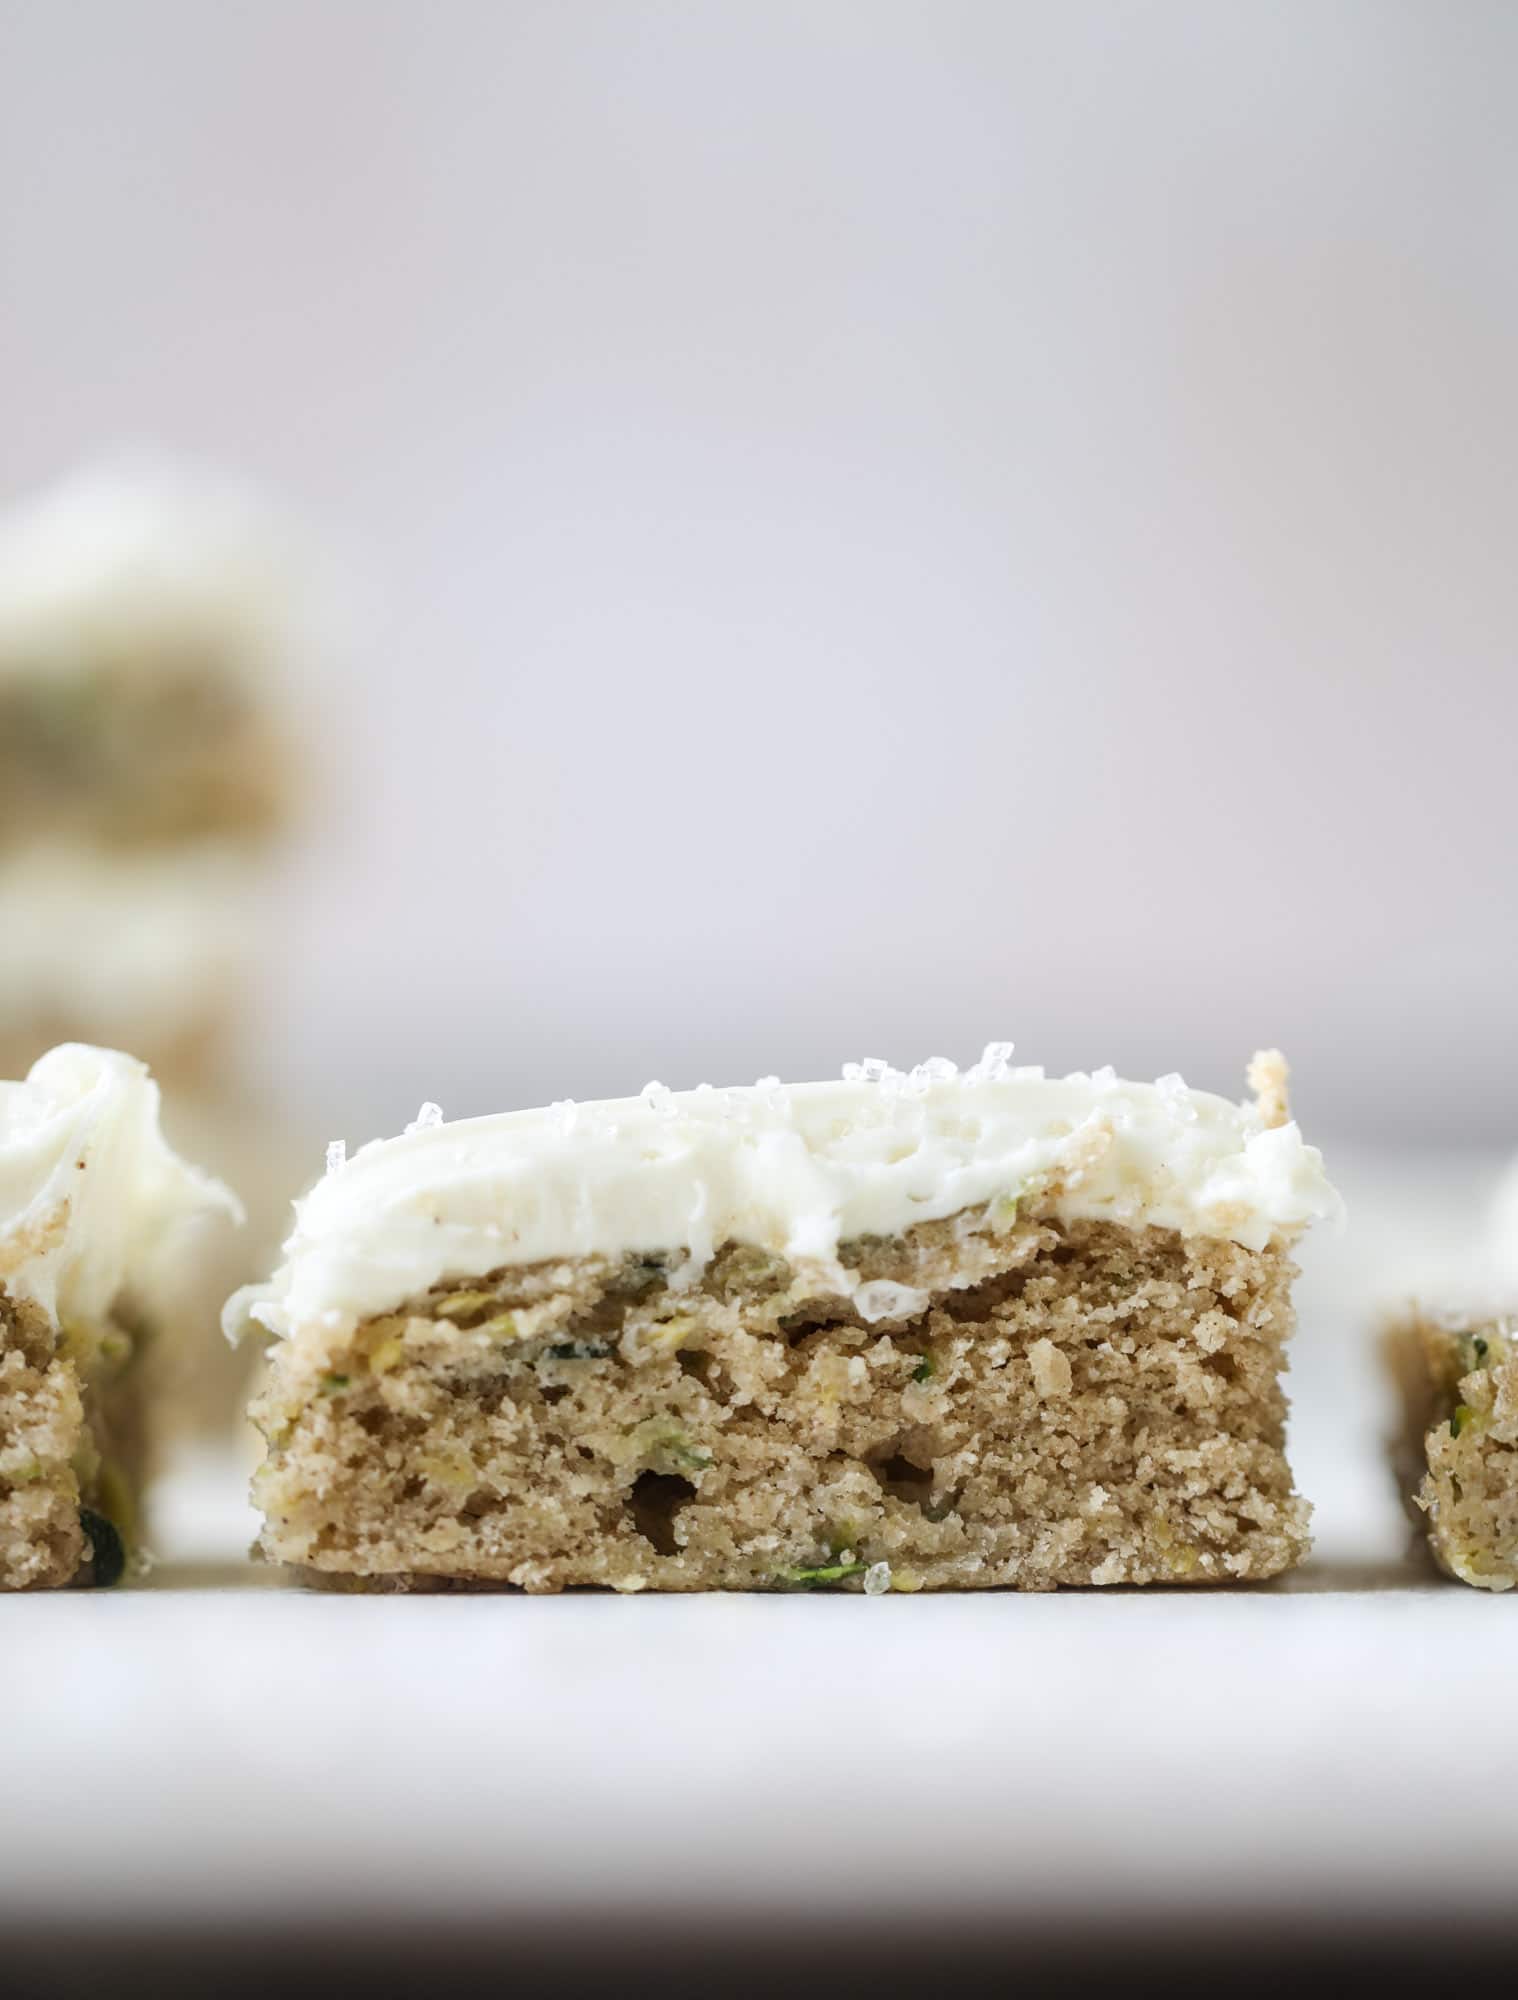 These zucchini bars with cream cheese icing are a fun twist on zucchini bread! Zucchini bars are super easy to make, have a little spice and a lot of flavor, topped with the creamiest cream cheese frosting. Delicious and simple! I howsweeteats.com #zucchini #bars #cream #cheese #icing #dessert